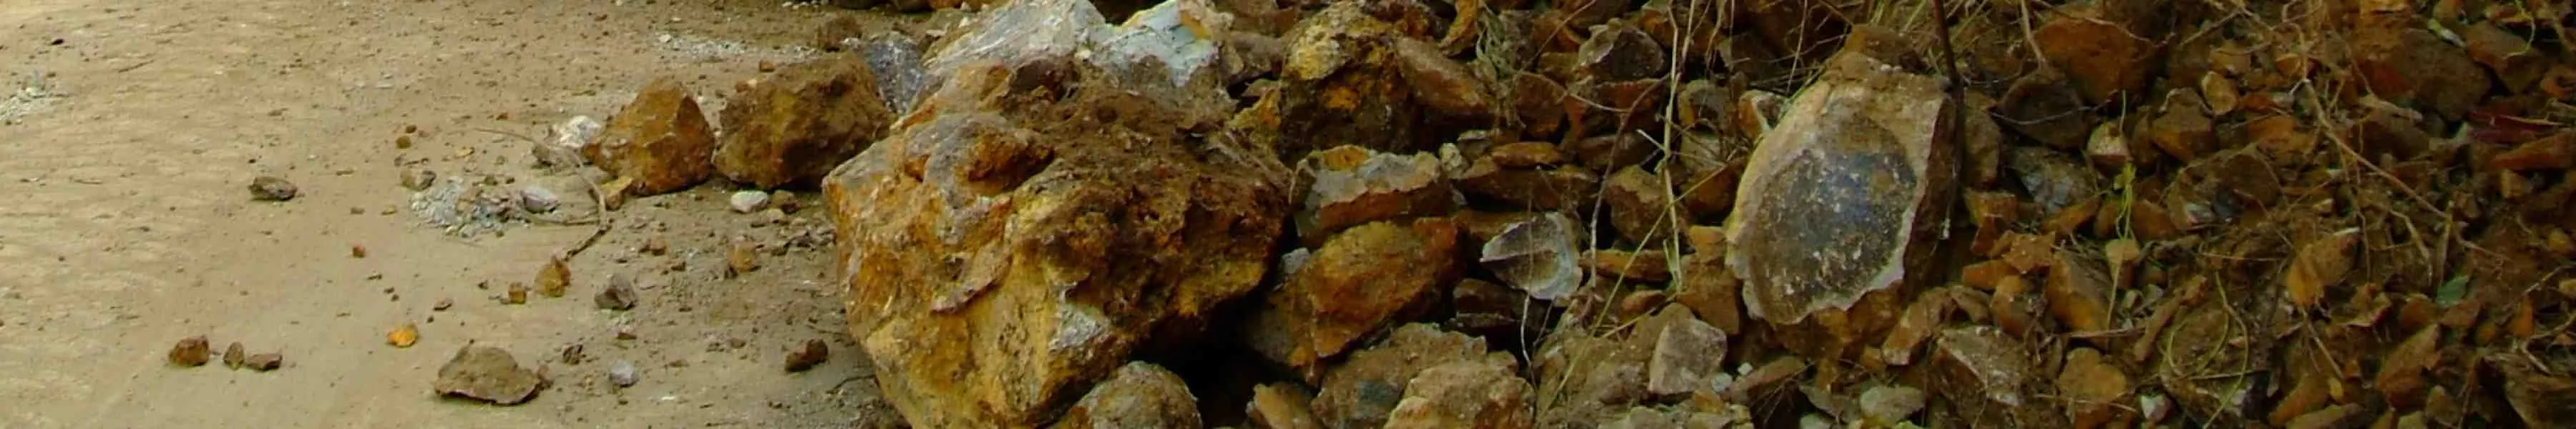 Banner image of a pile of rocks